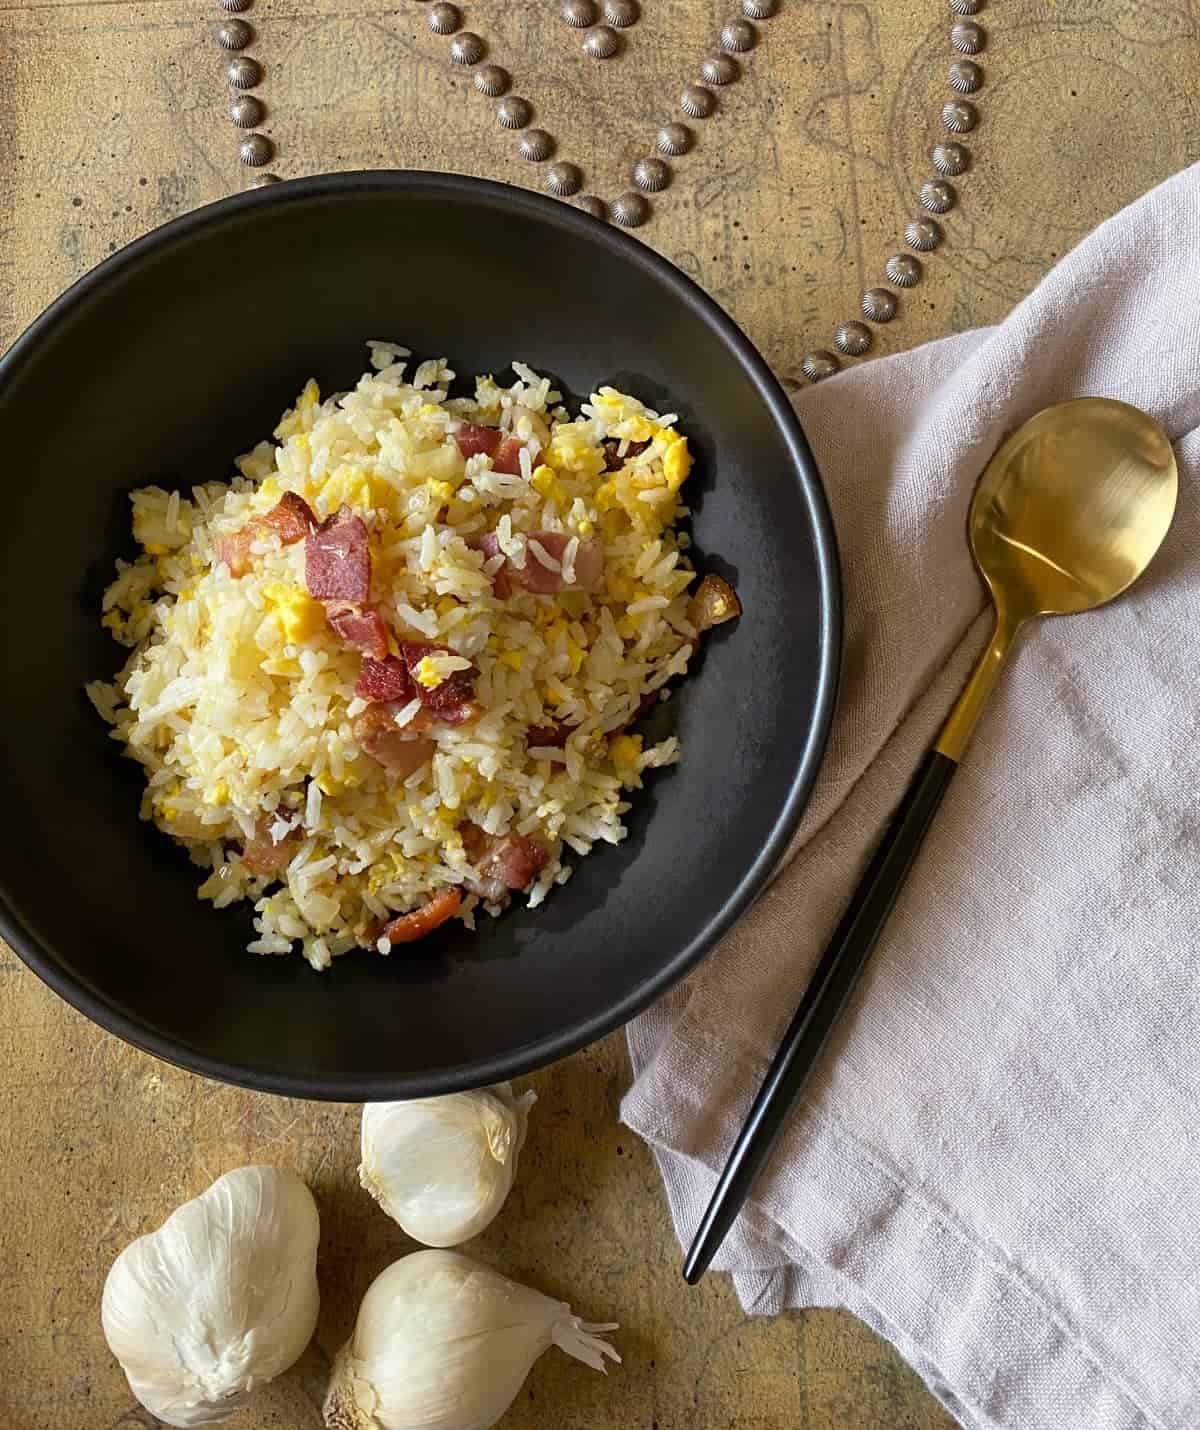 Fried rice with bacon and egg in a black bowl with a spoon on the side.